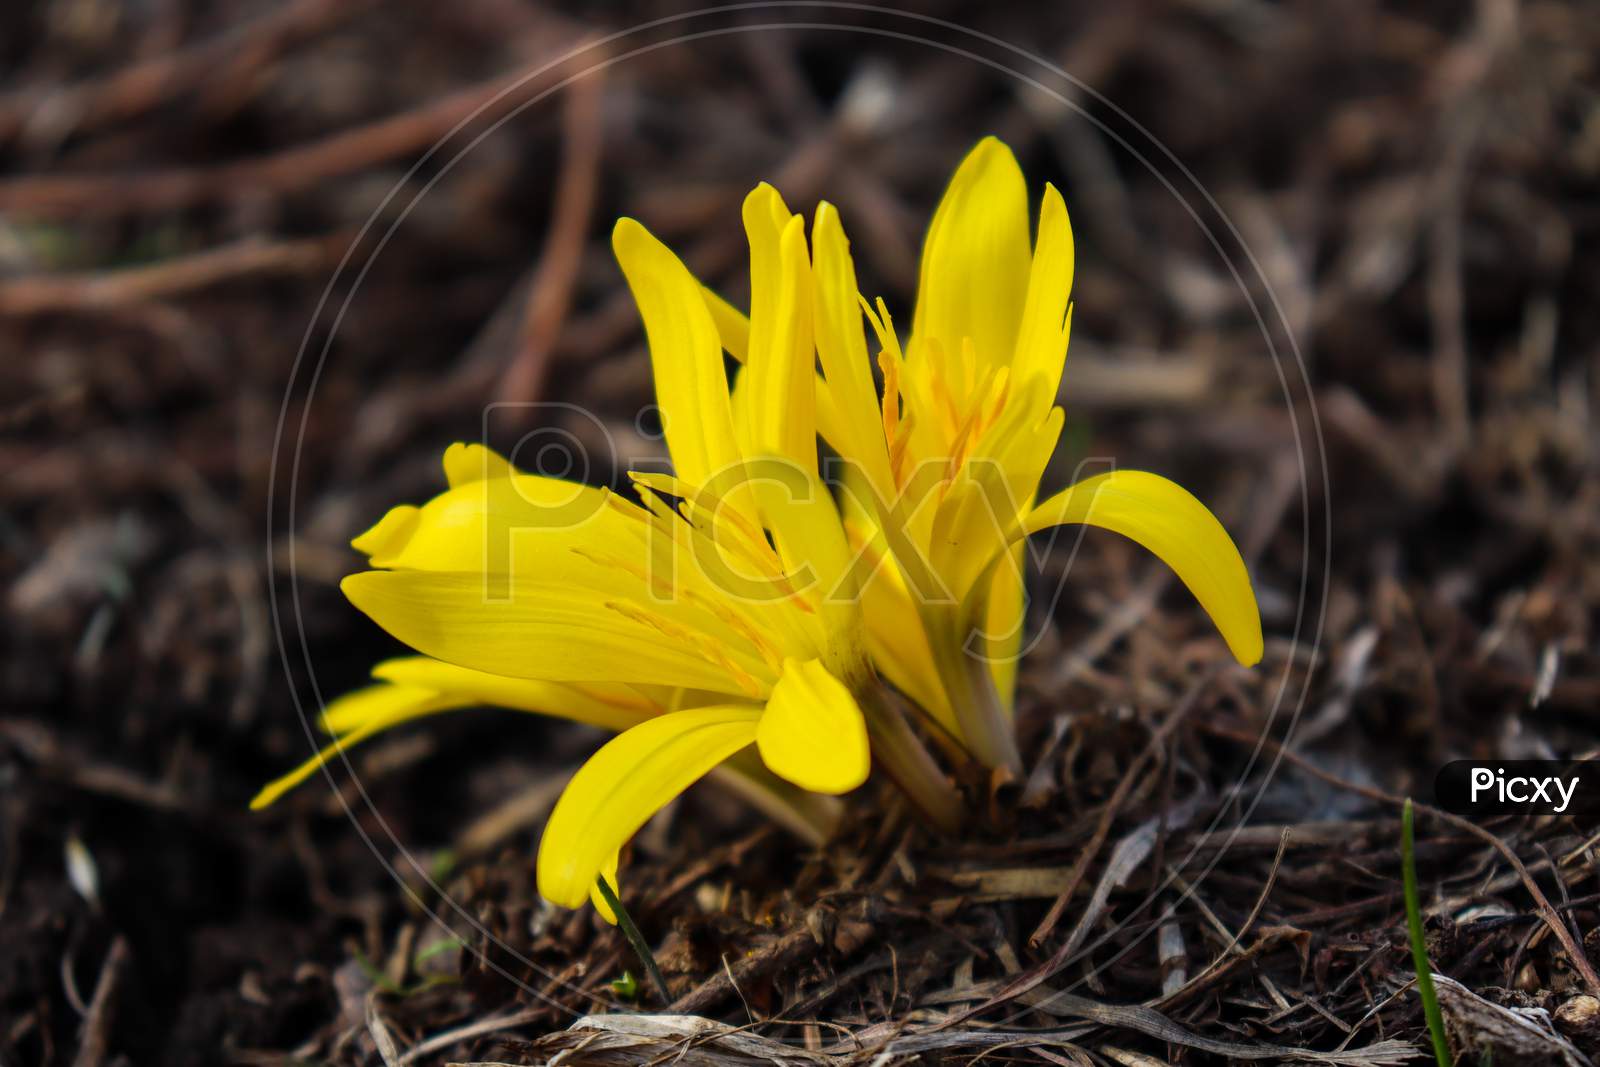 First Flower Sprouting after Harsh winter in Kashmir